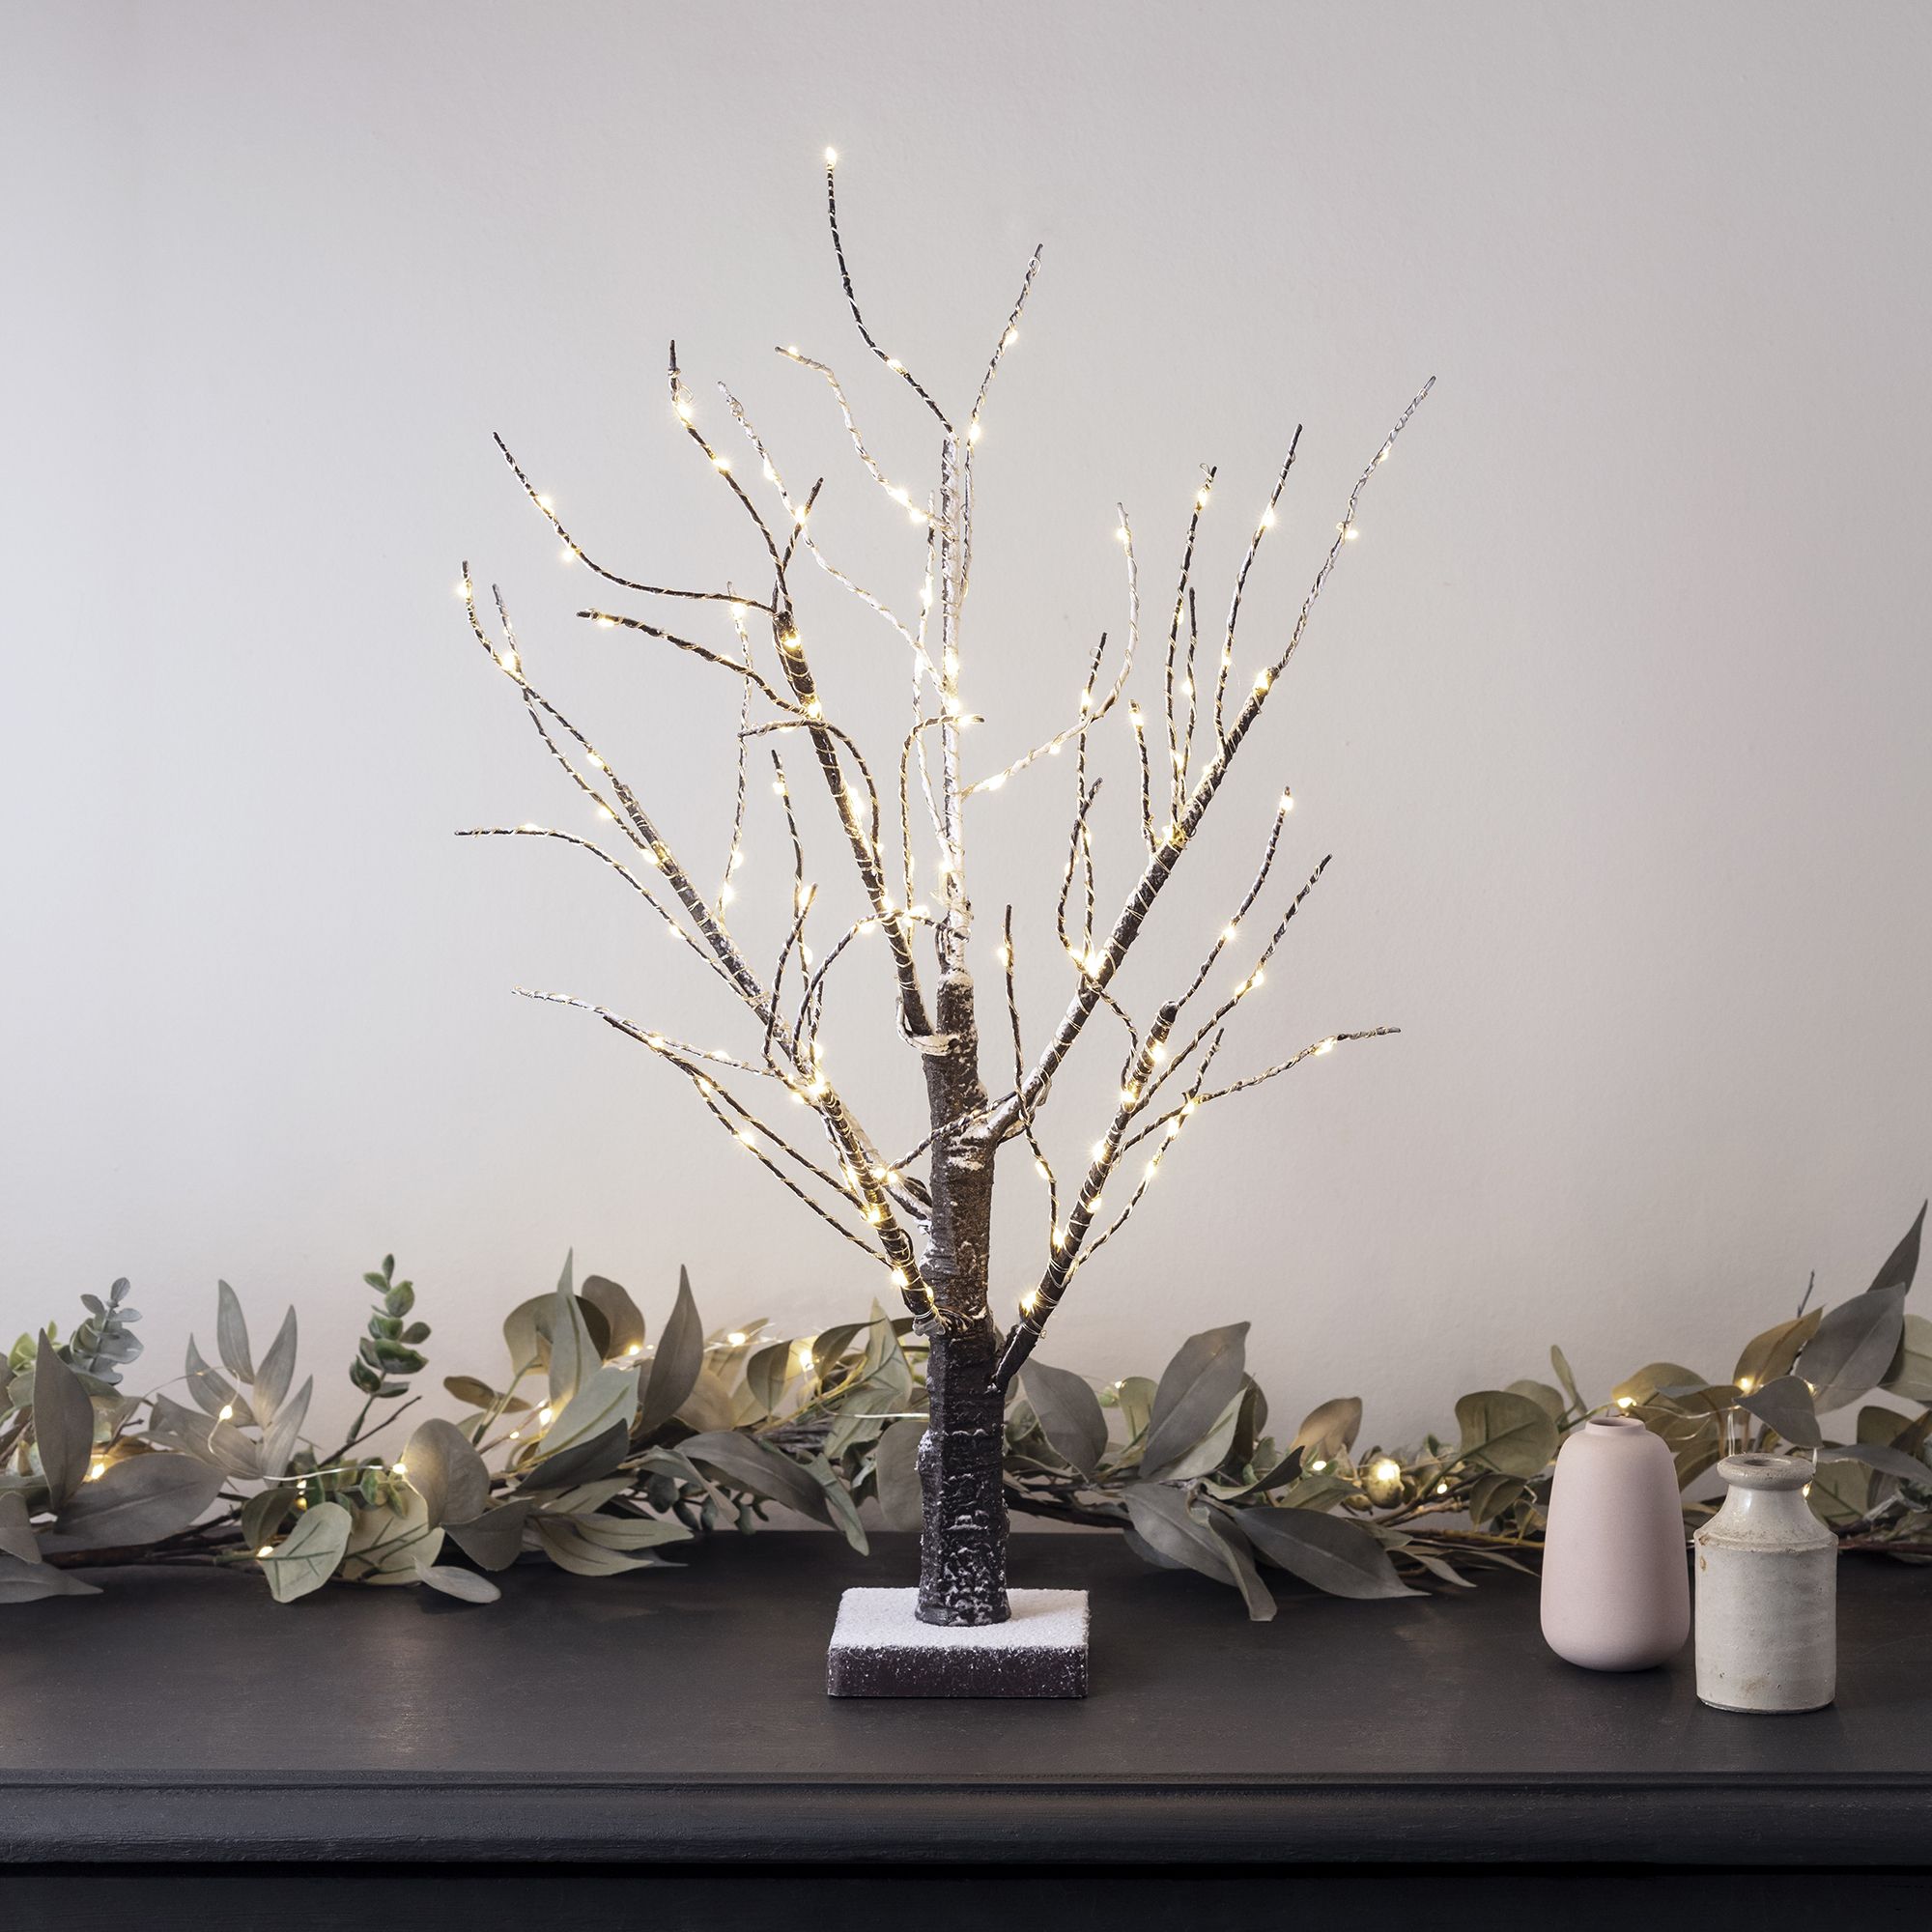 Details about   45cm Rustic Shabby Chic Birch Twig Christmas Tree Pre-lit With 48 Warm White LED 